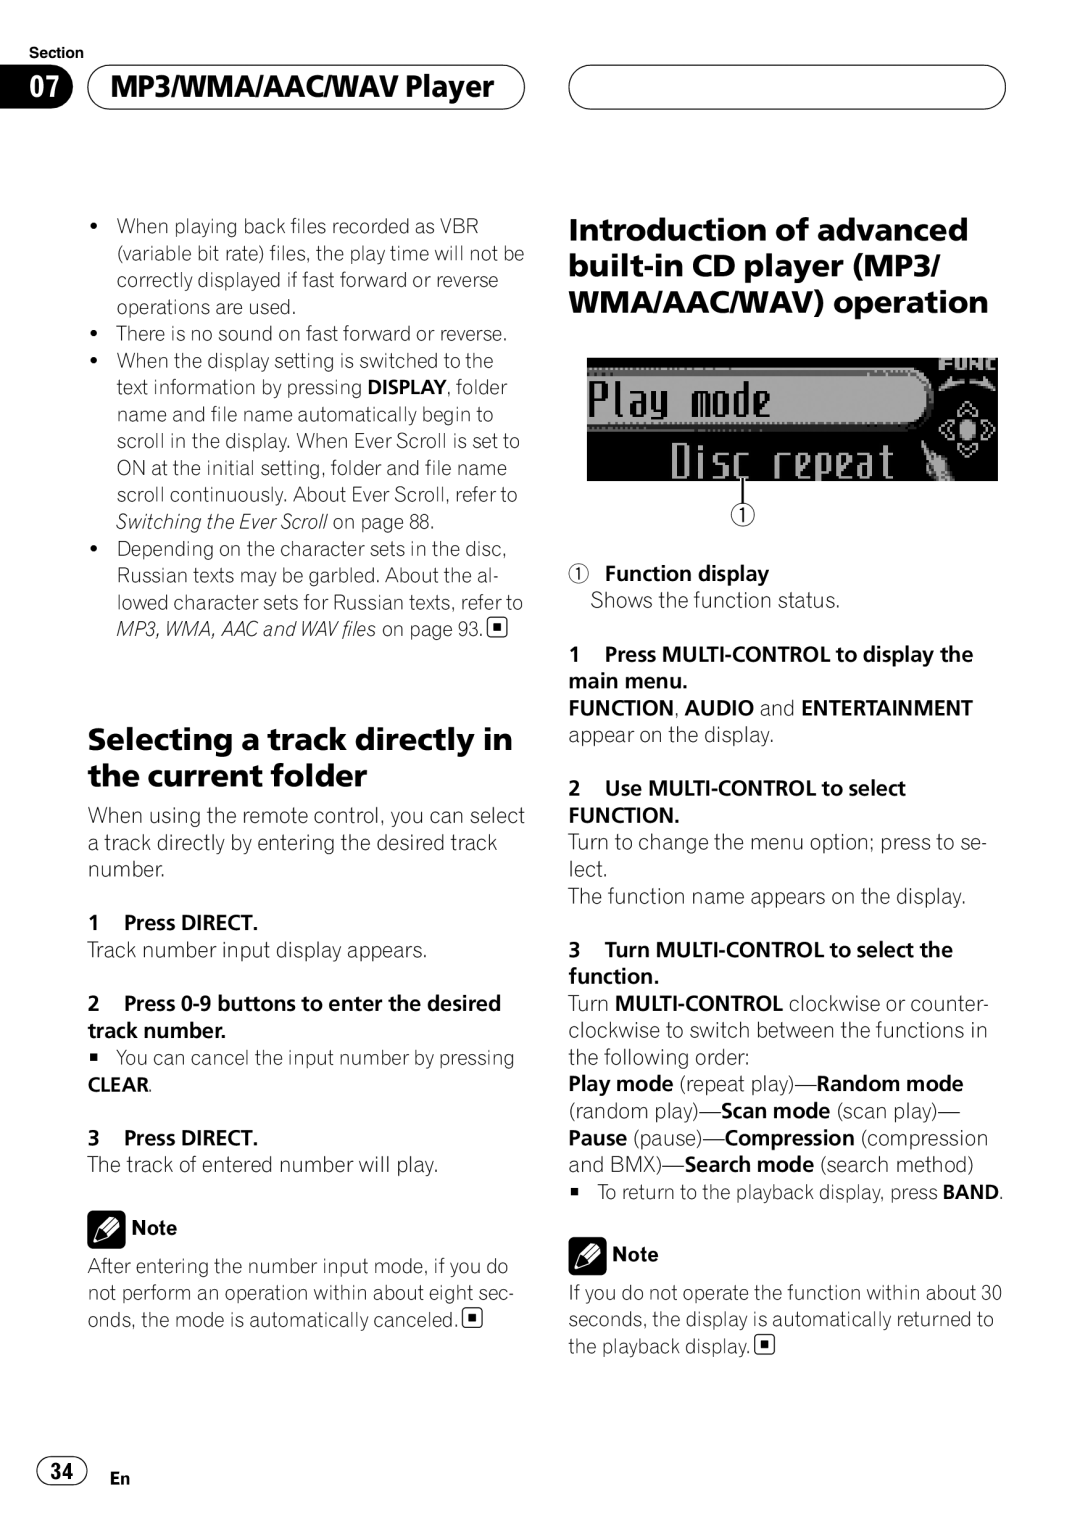 Pioneer DEH-P75BT operation manual 07MP3/WMA/AAC/WAV Player, Selecting a track directly in the current folder 